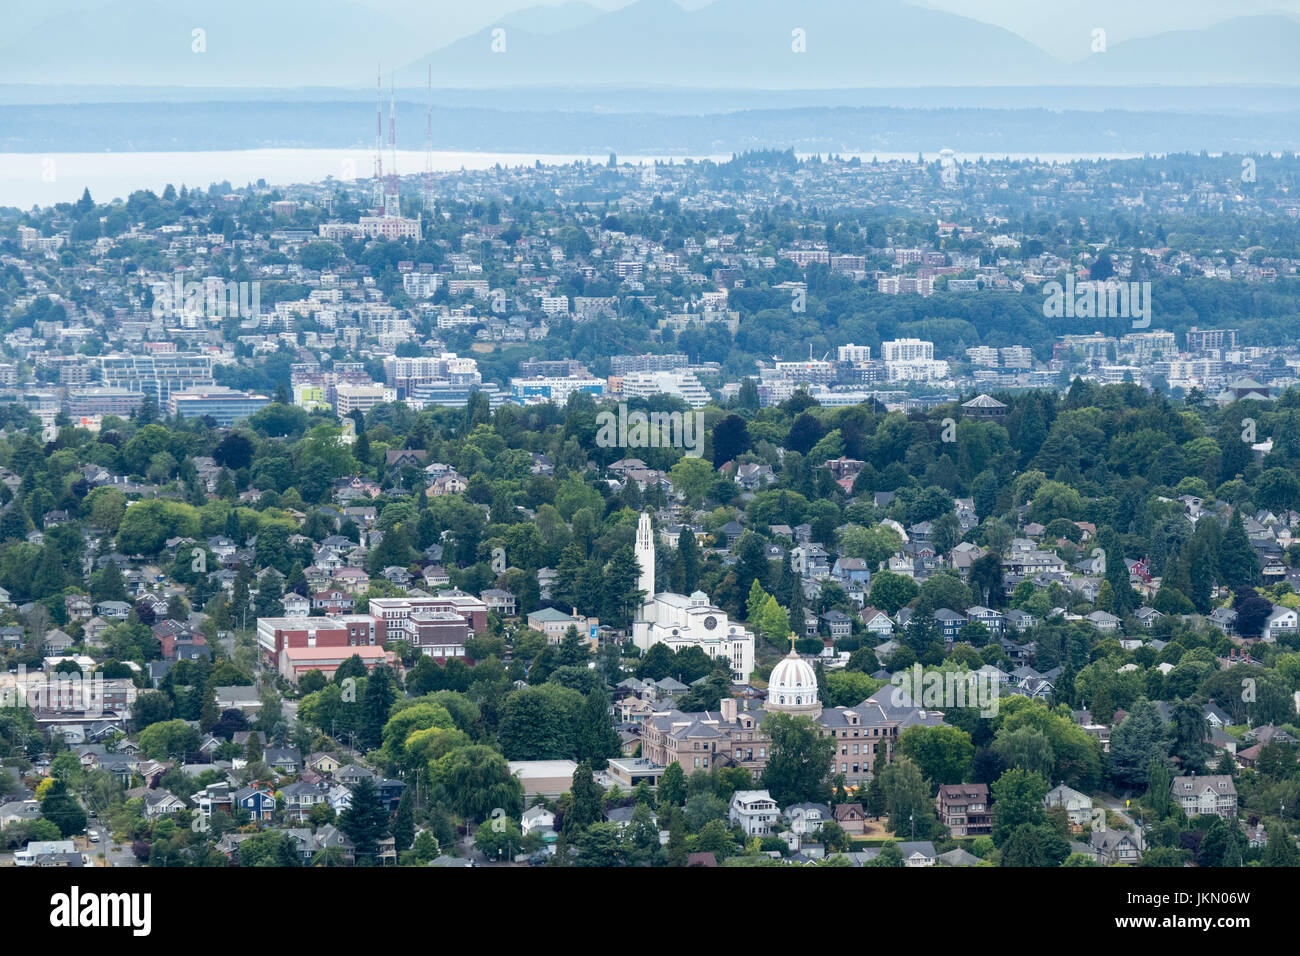 aerial view of St. Joseph's Catholic Church and Holy Names Academy, Capitol Hill, Seattle, Washington State, USA Stock Photo